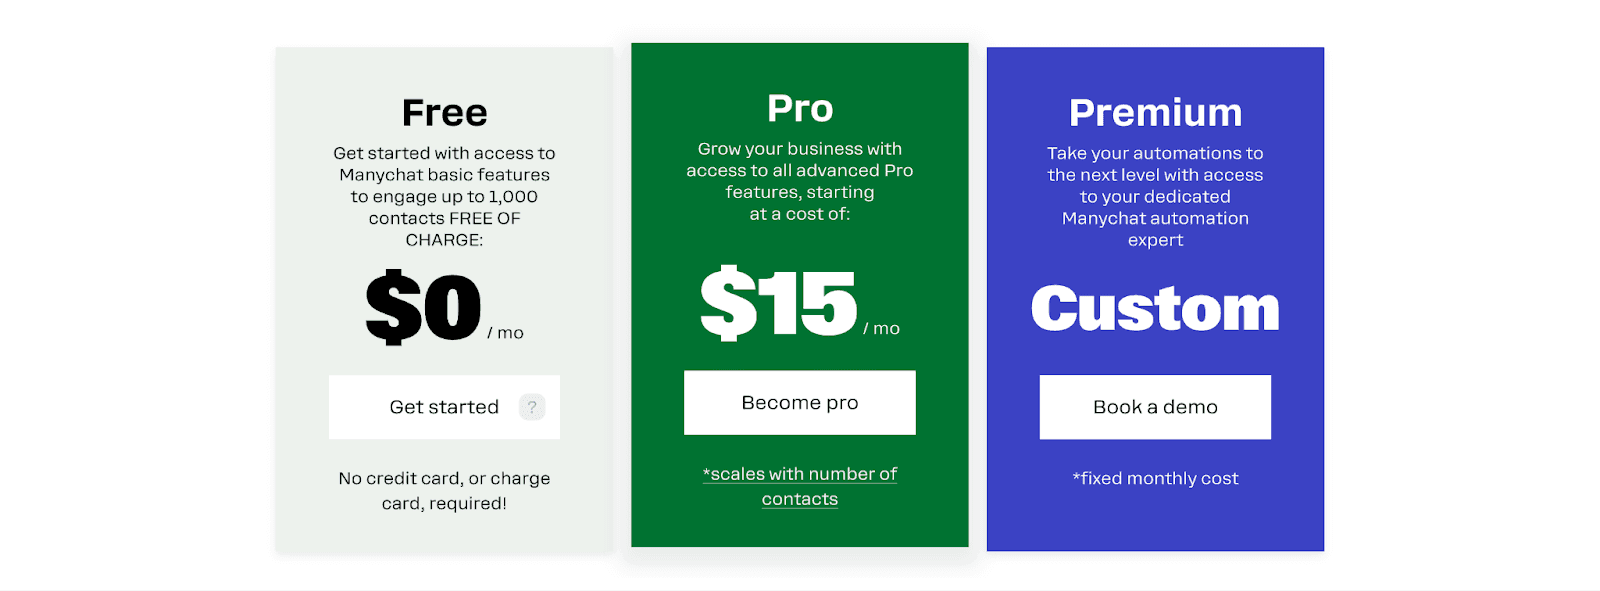 Manychat pricing and plans - Free, Pro, Premium